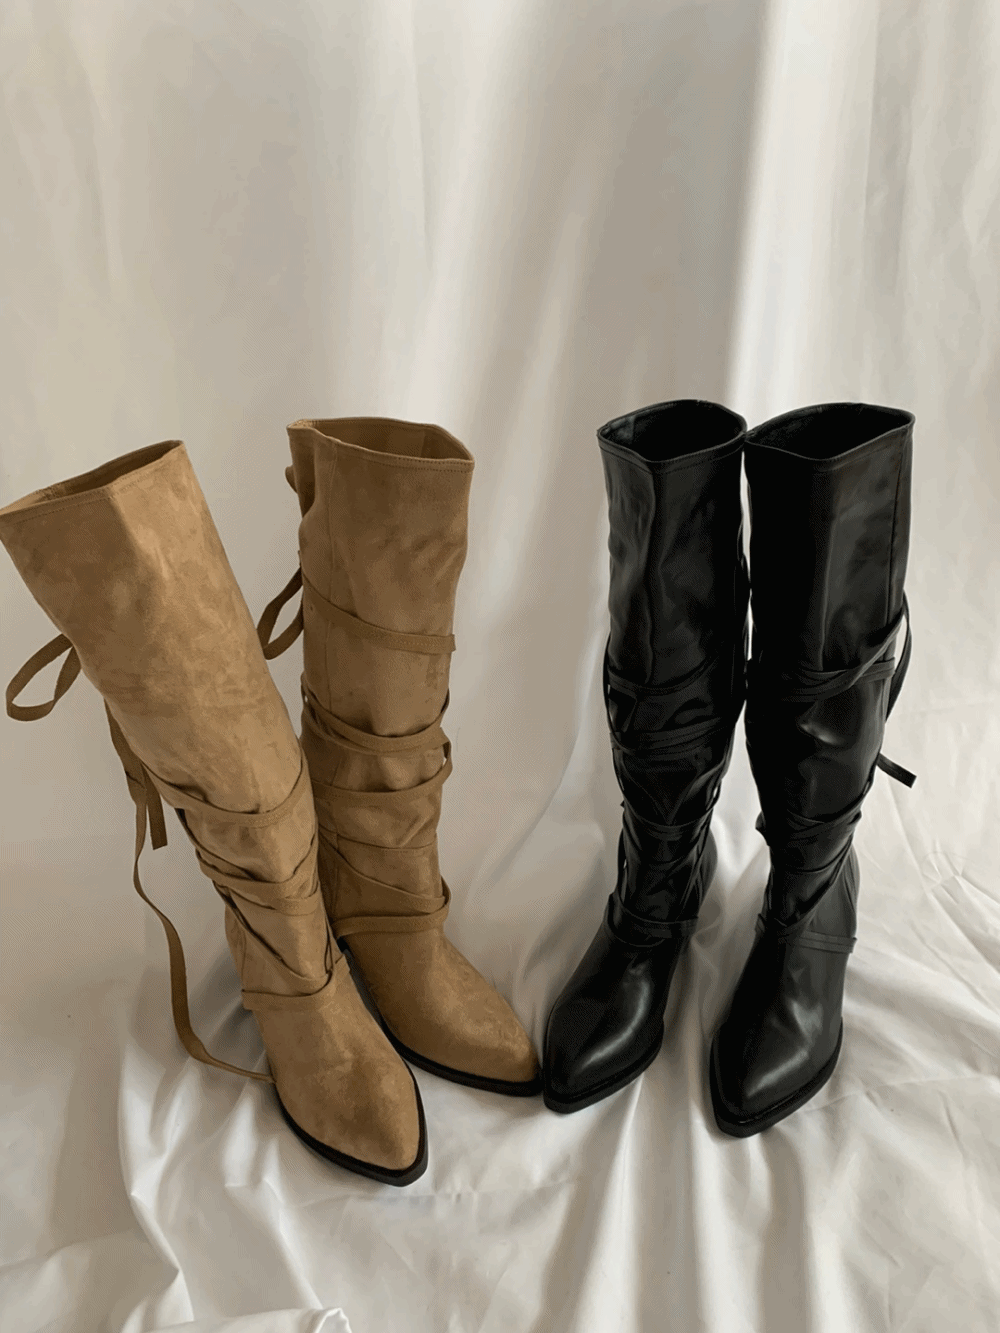 [Shoes] Glam Lace-up Strap Boots / 2 colors